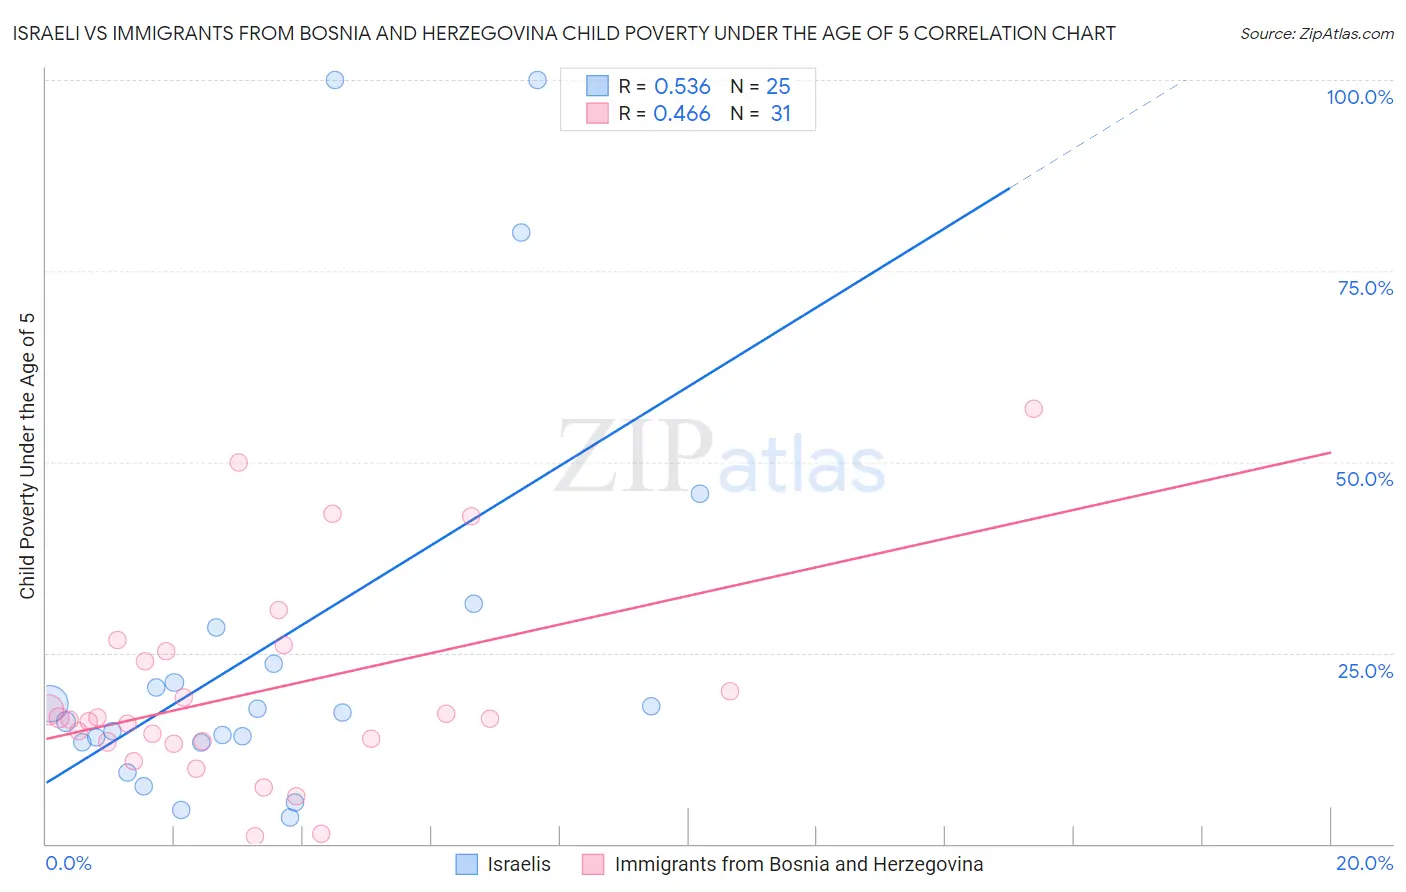 Israeli vs Immigrants from Bosnia and Herzegovina Child Poverty Under the Age of 5